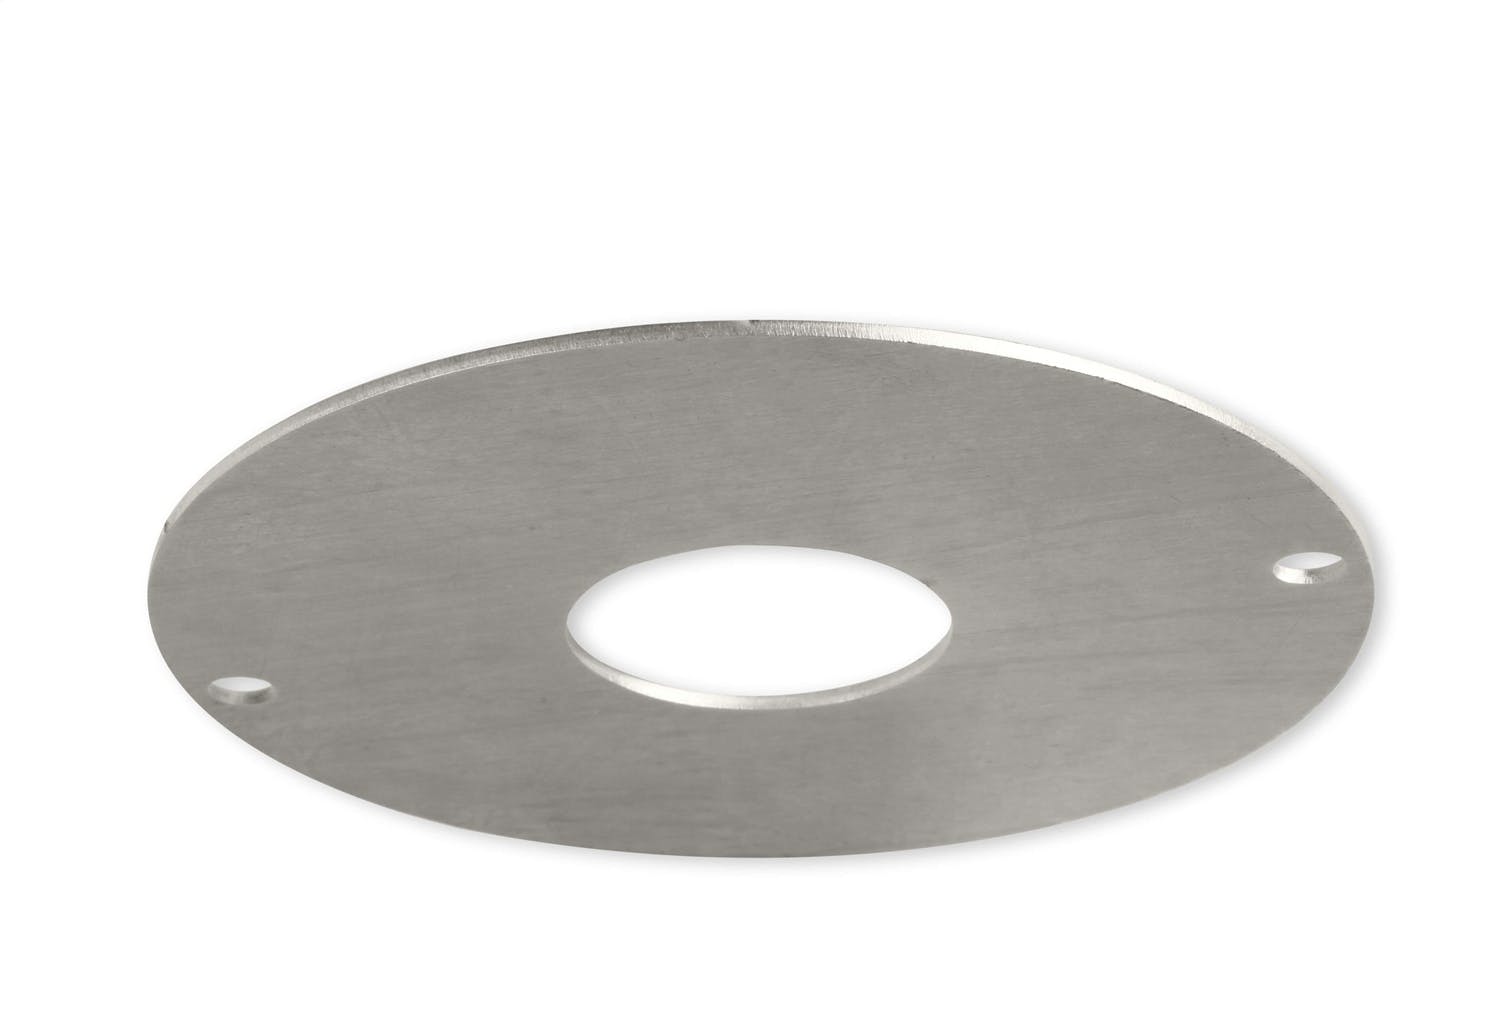 Holley 319-202 T56 RELEASE BEARING SHIM .119 THICK